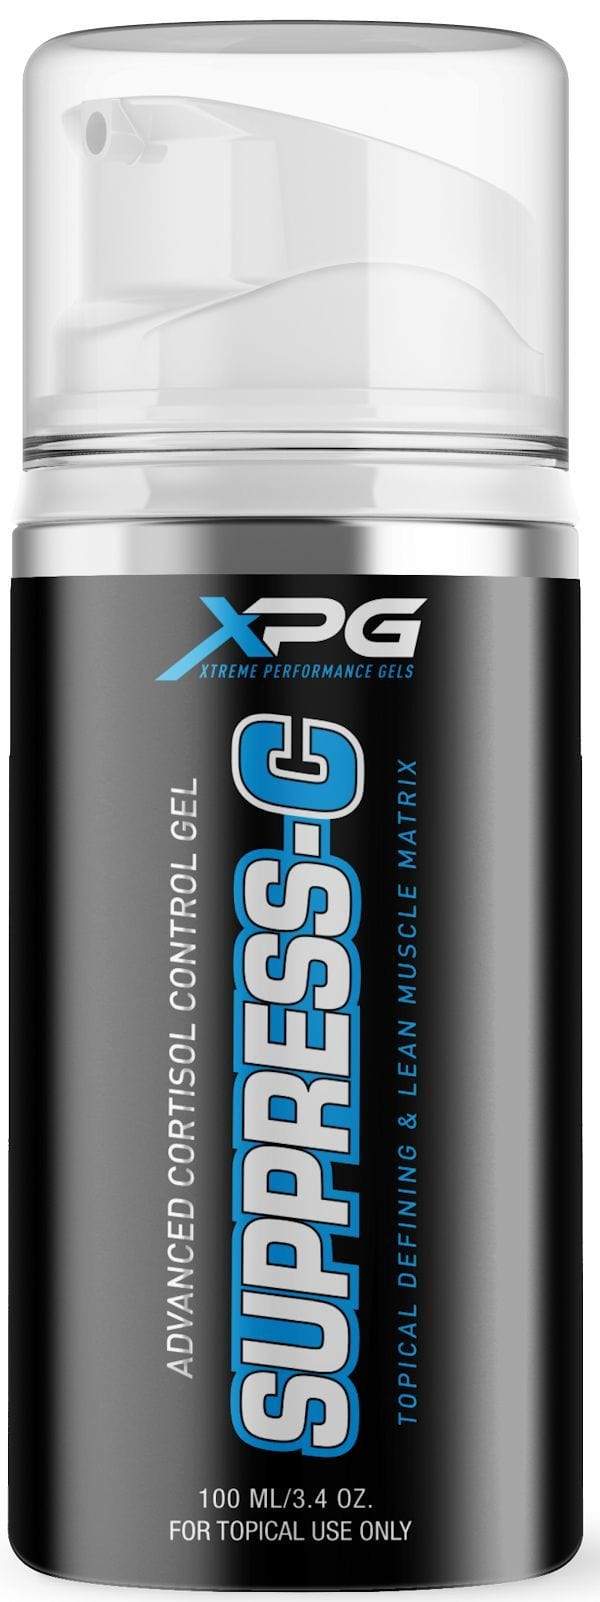 Xtreme Performance Gels Suppress-C XPG Body and Fitness